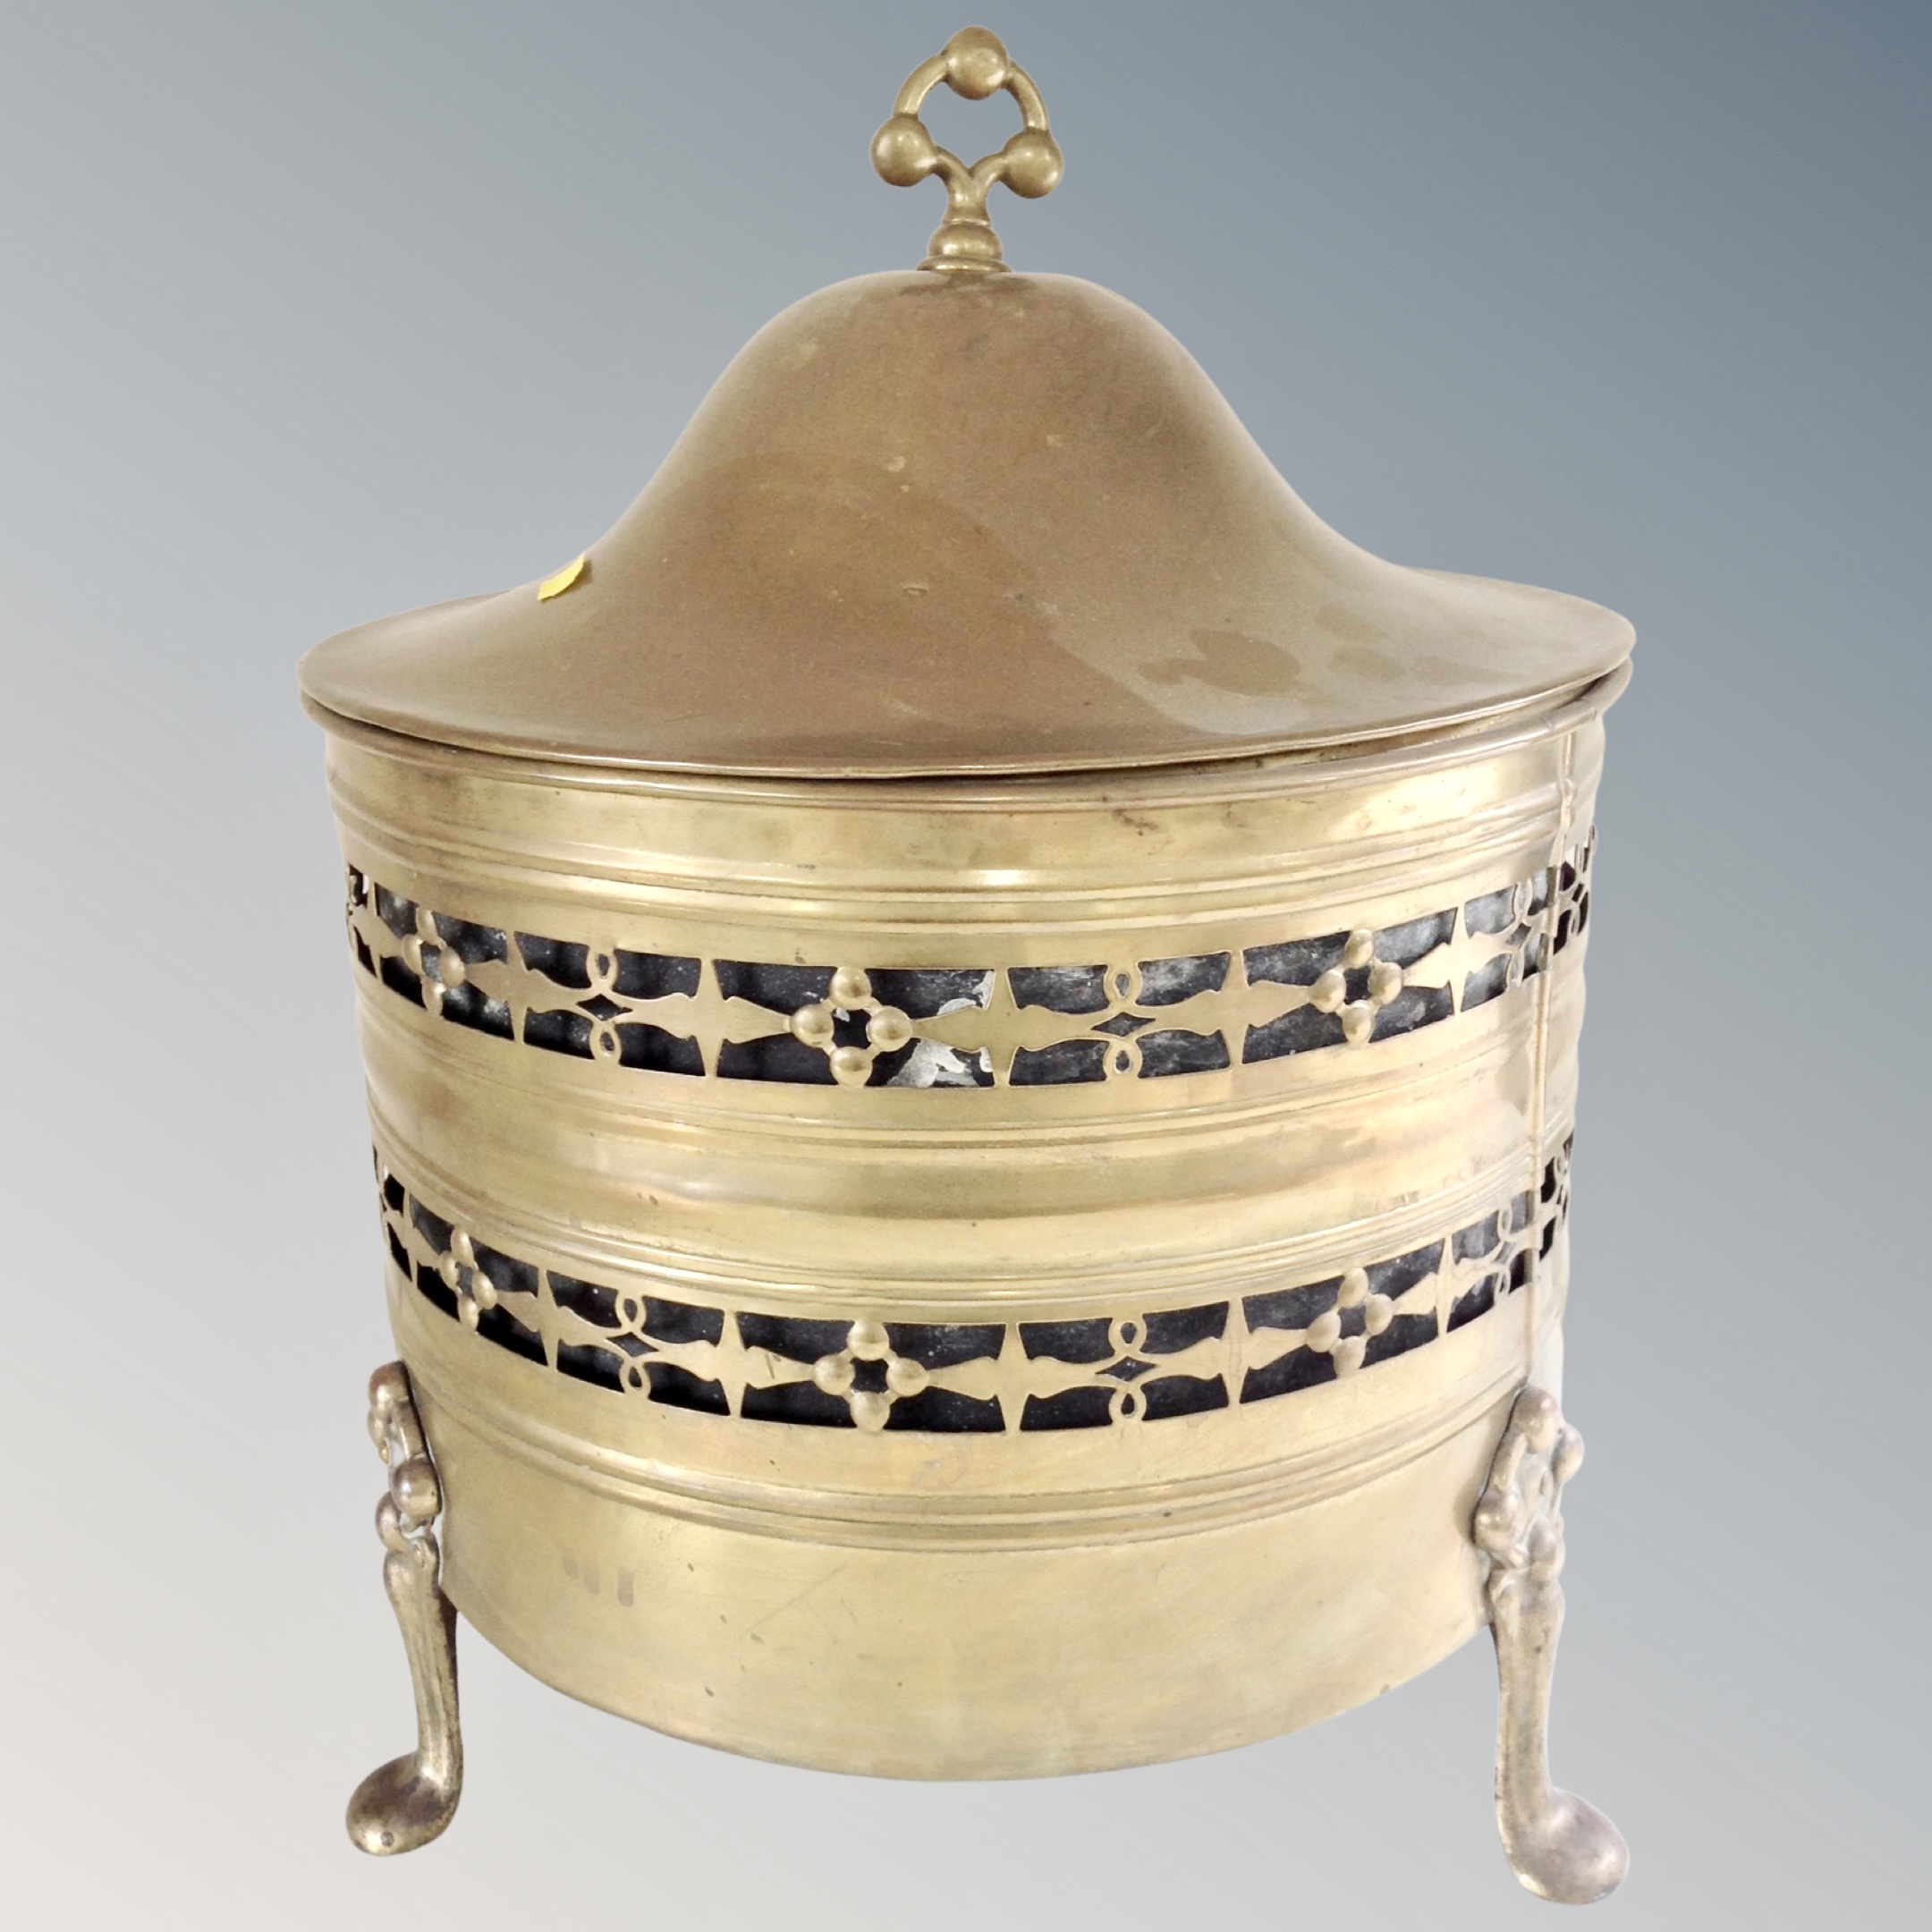 An antique brass lidded coal bucket with liner on raised feet.